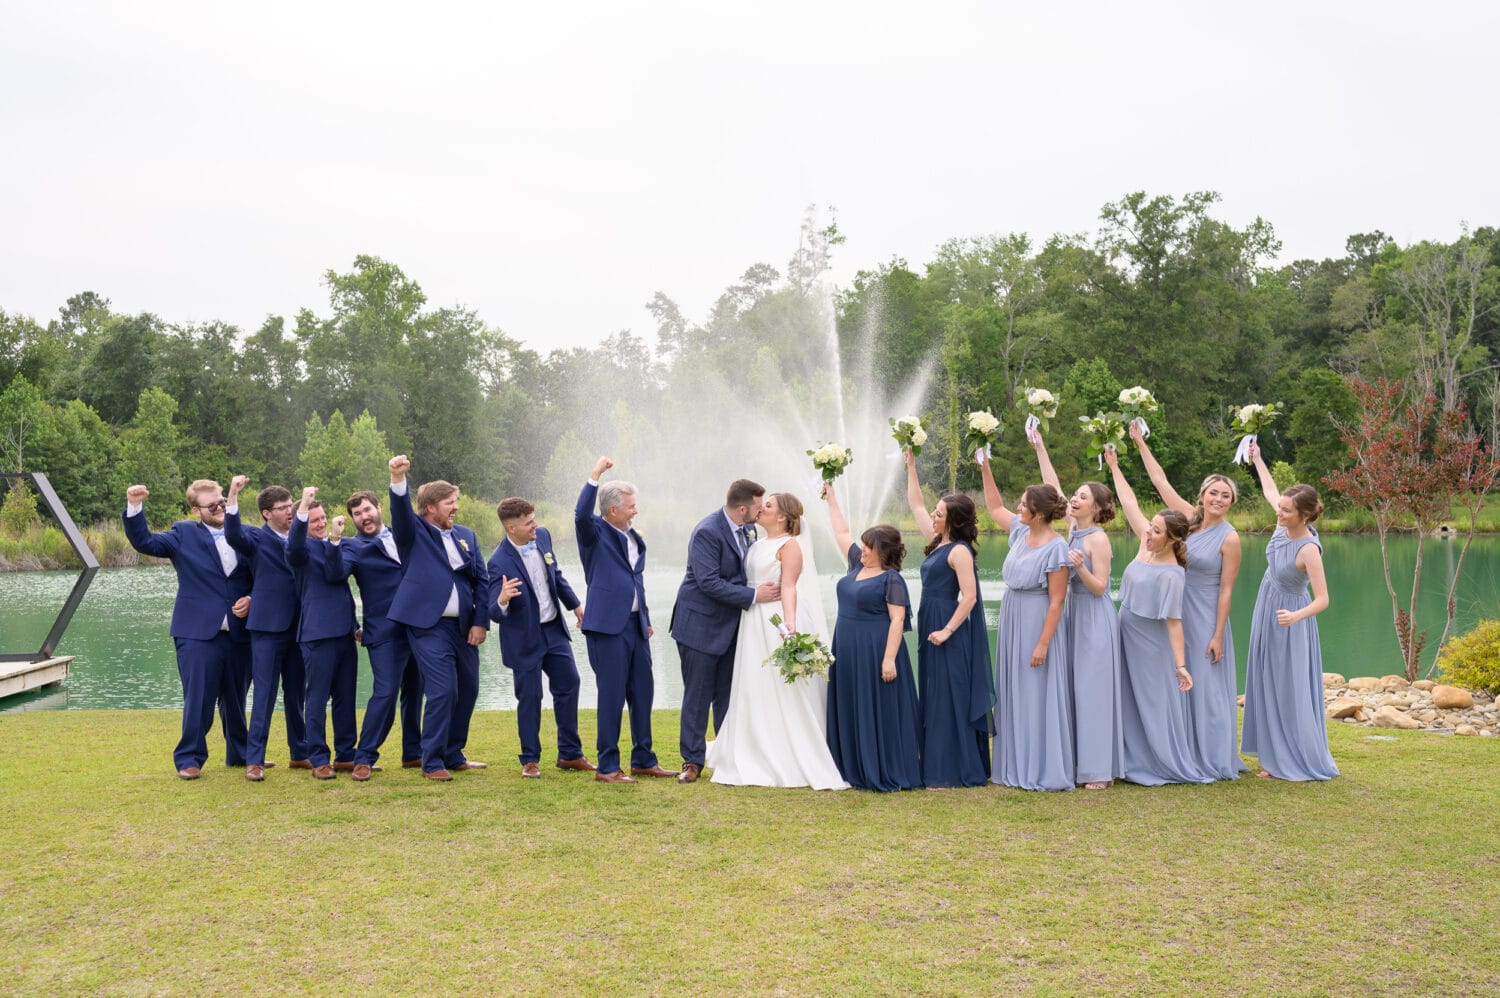 Pictures with the wedding party by the lake - The Venue at White Oaks Farm